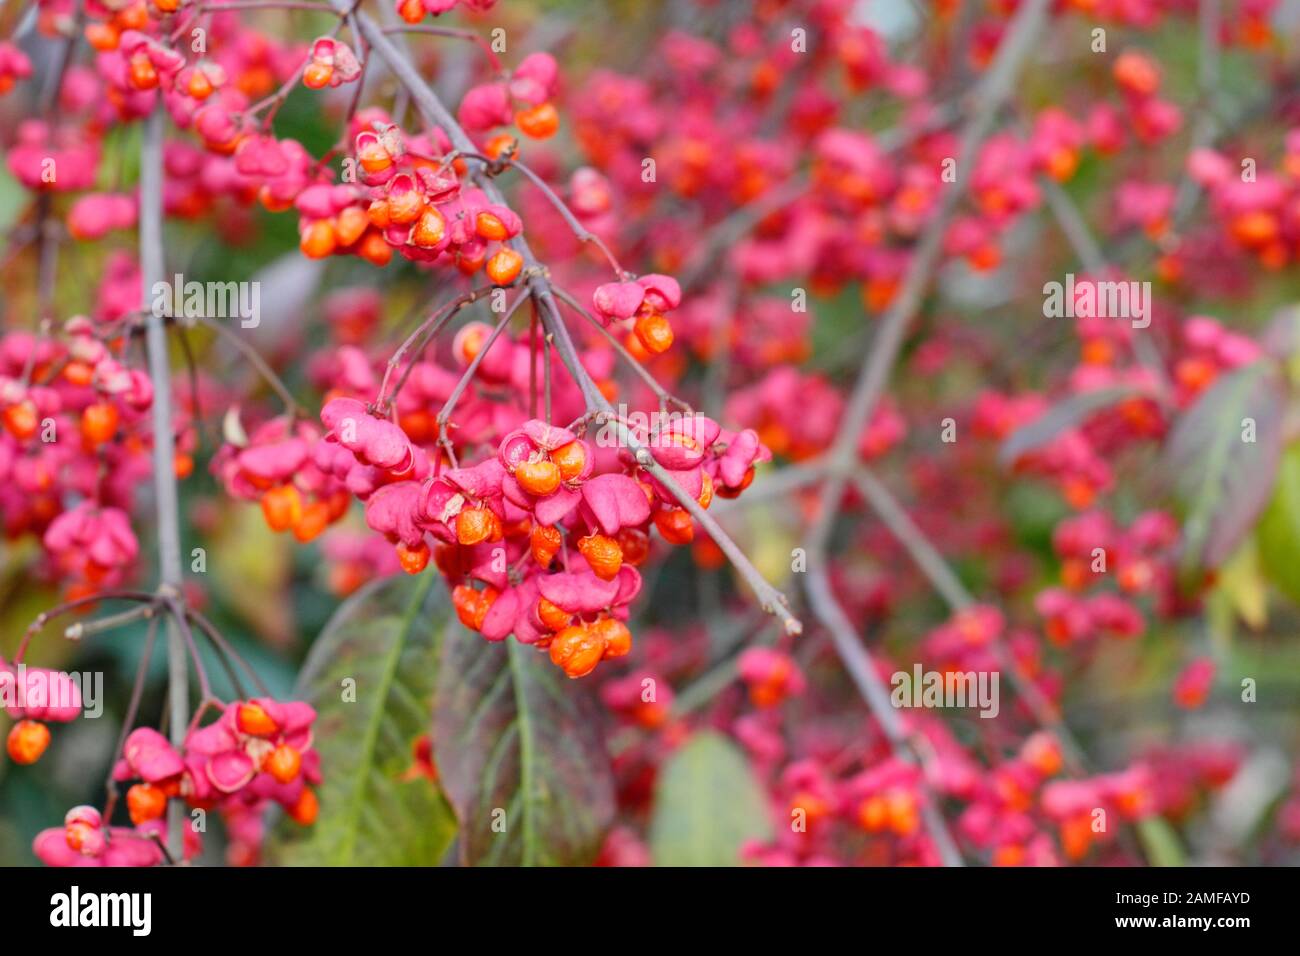 Euonymus europaeus 'Red Cascade' spindle tree displaying distinctive bright pink fruits and orange seeds in autumn. UK Stock Photo